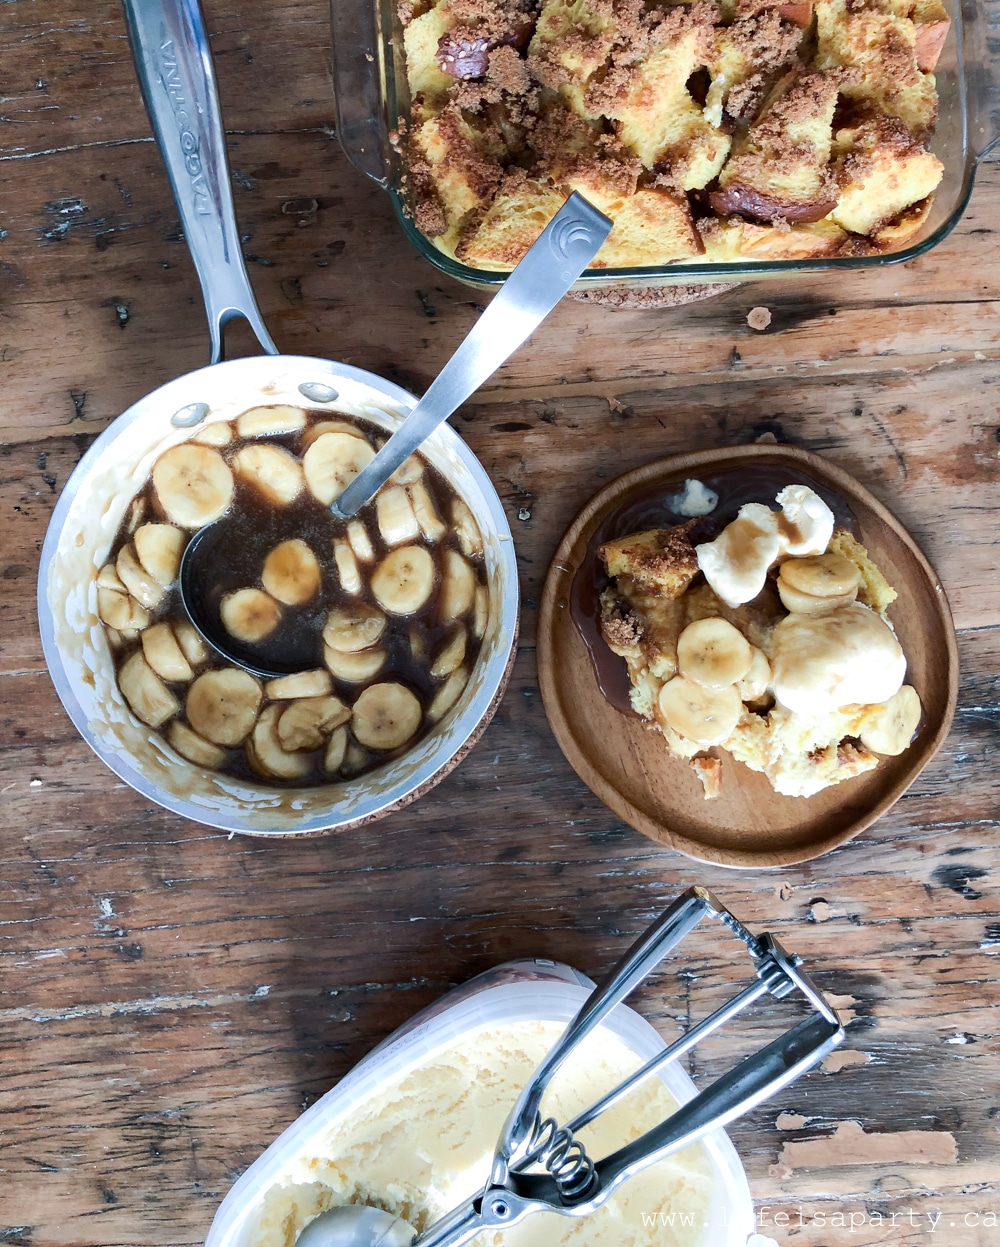 'Ohana's famous Tropical Bread Pudding with Caramel Banana Topping